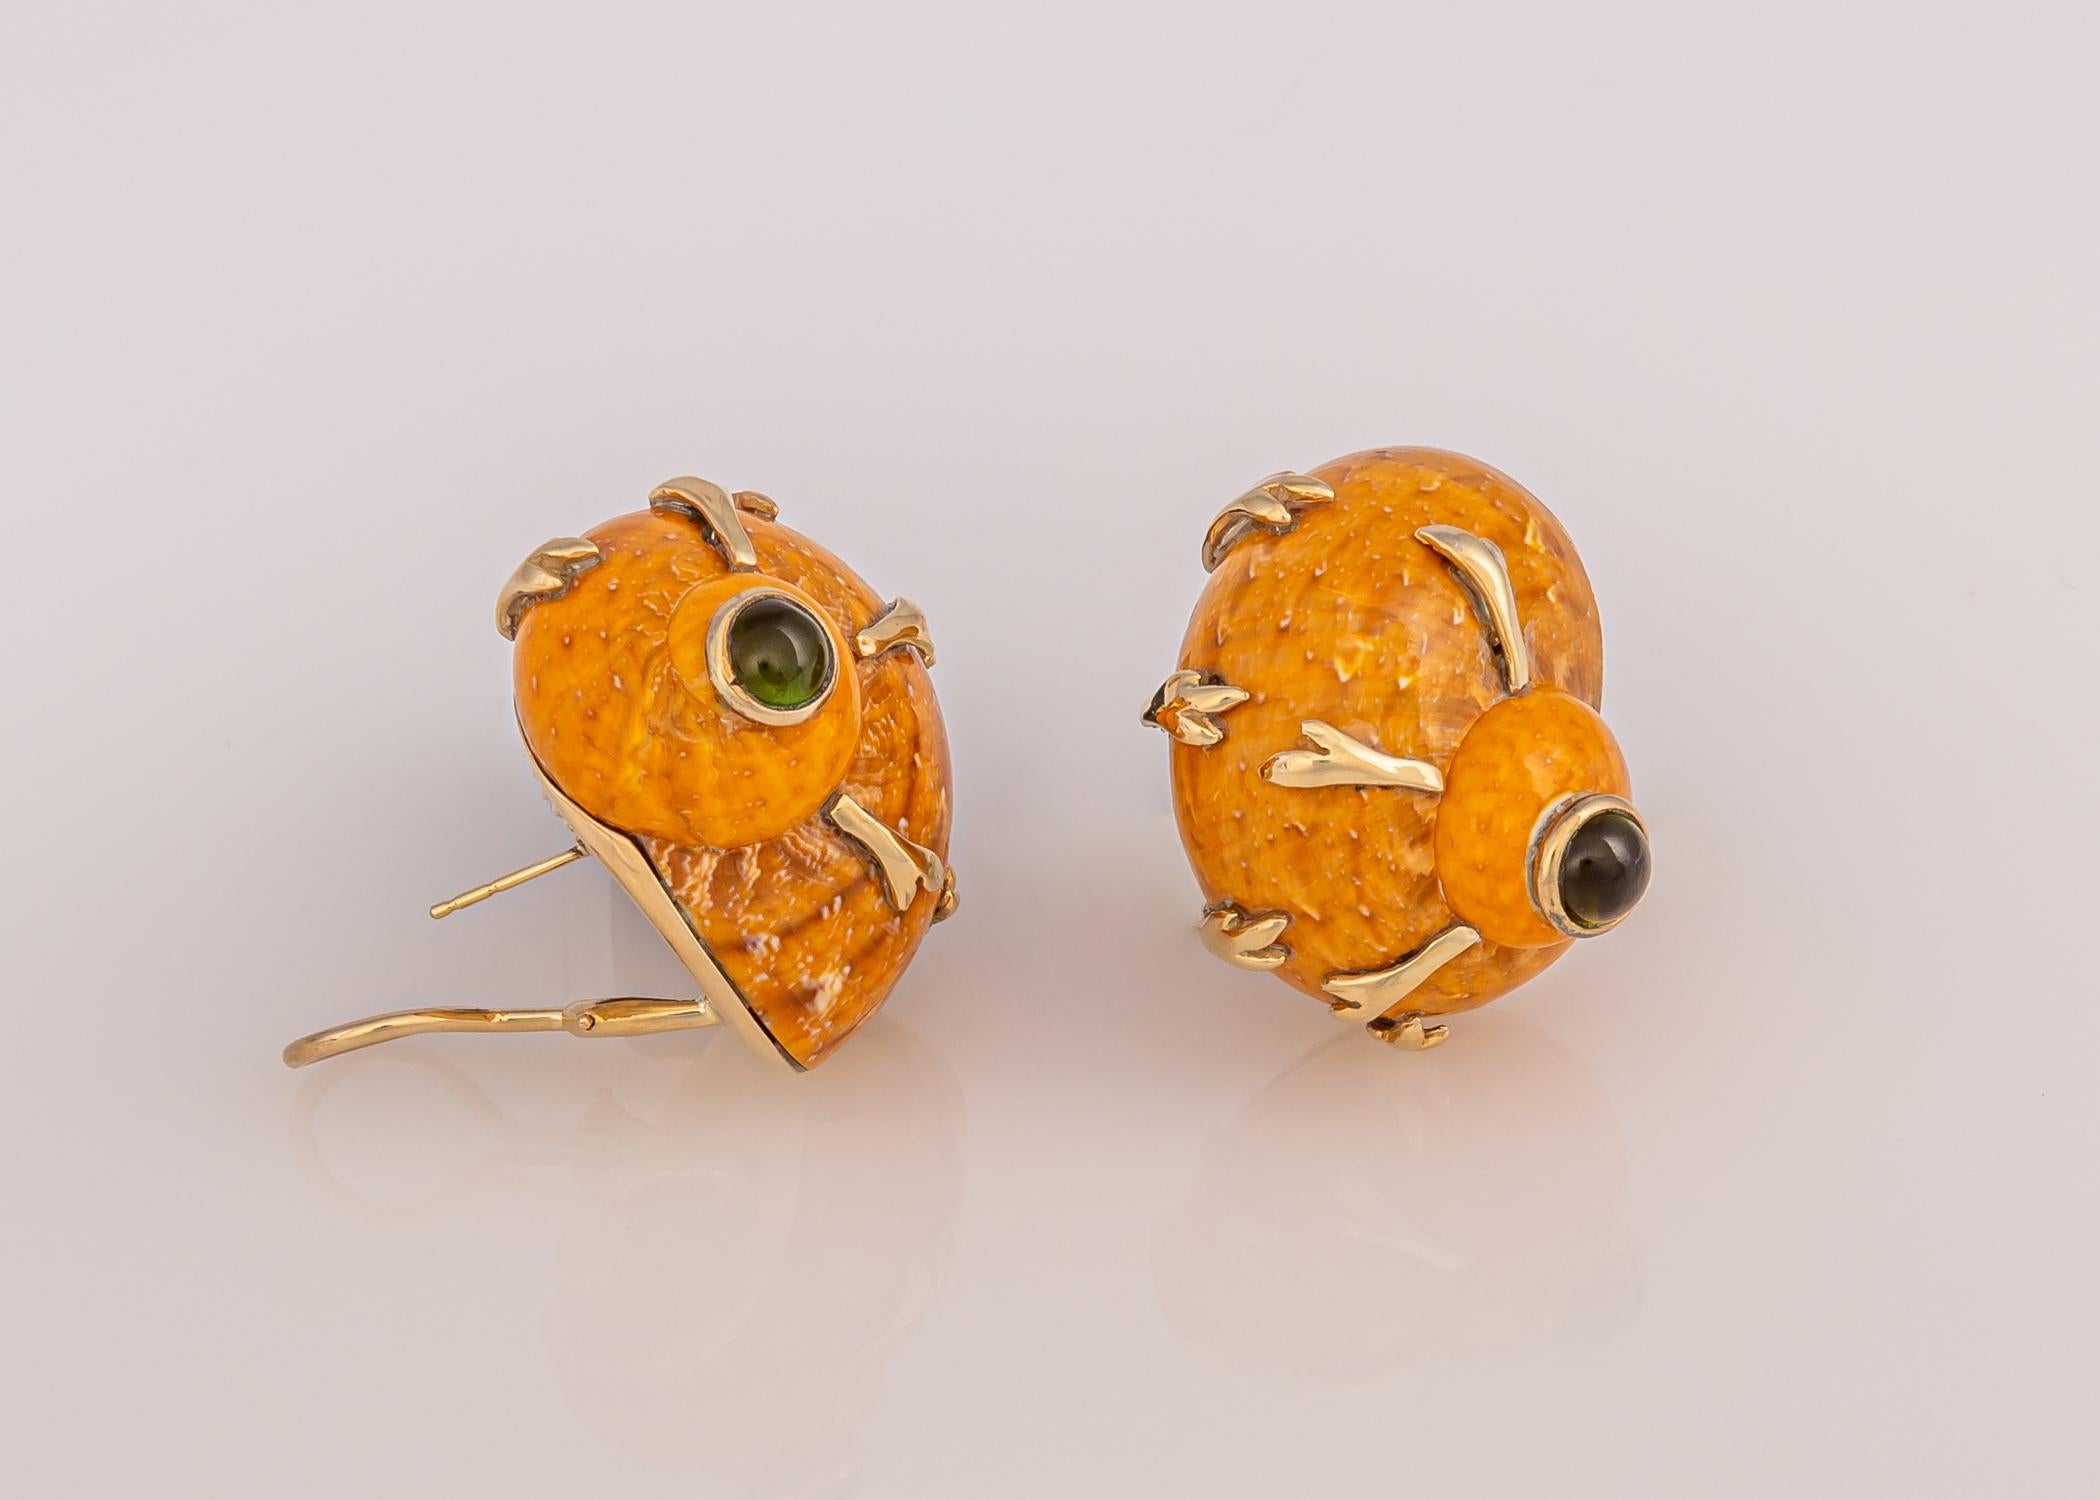 Natural shell earrings are a great addition to any earring collection. Maz choose beautiful russet color shells and green tourmalines and added exceptional gold accents. A perfect choice you can enjoy year round. Approximately 1 1/8 inches in size.